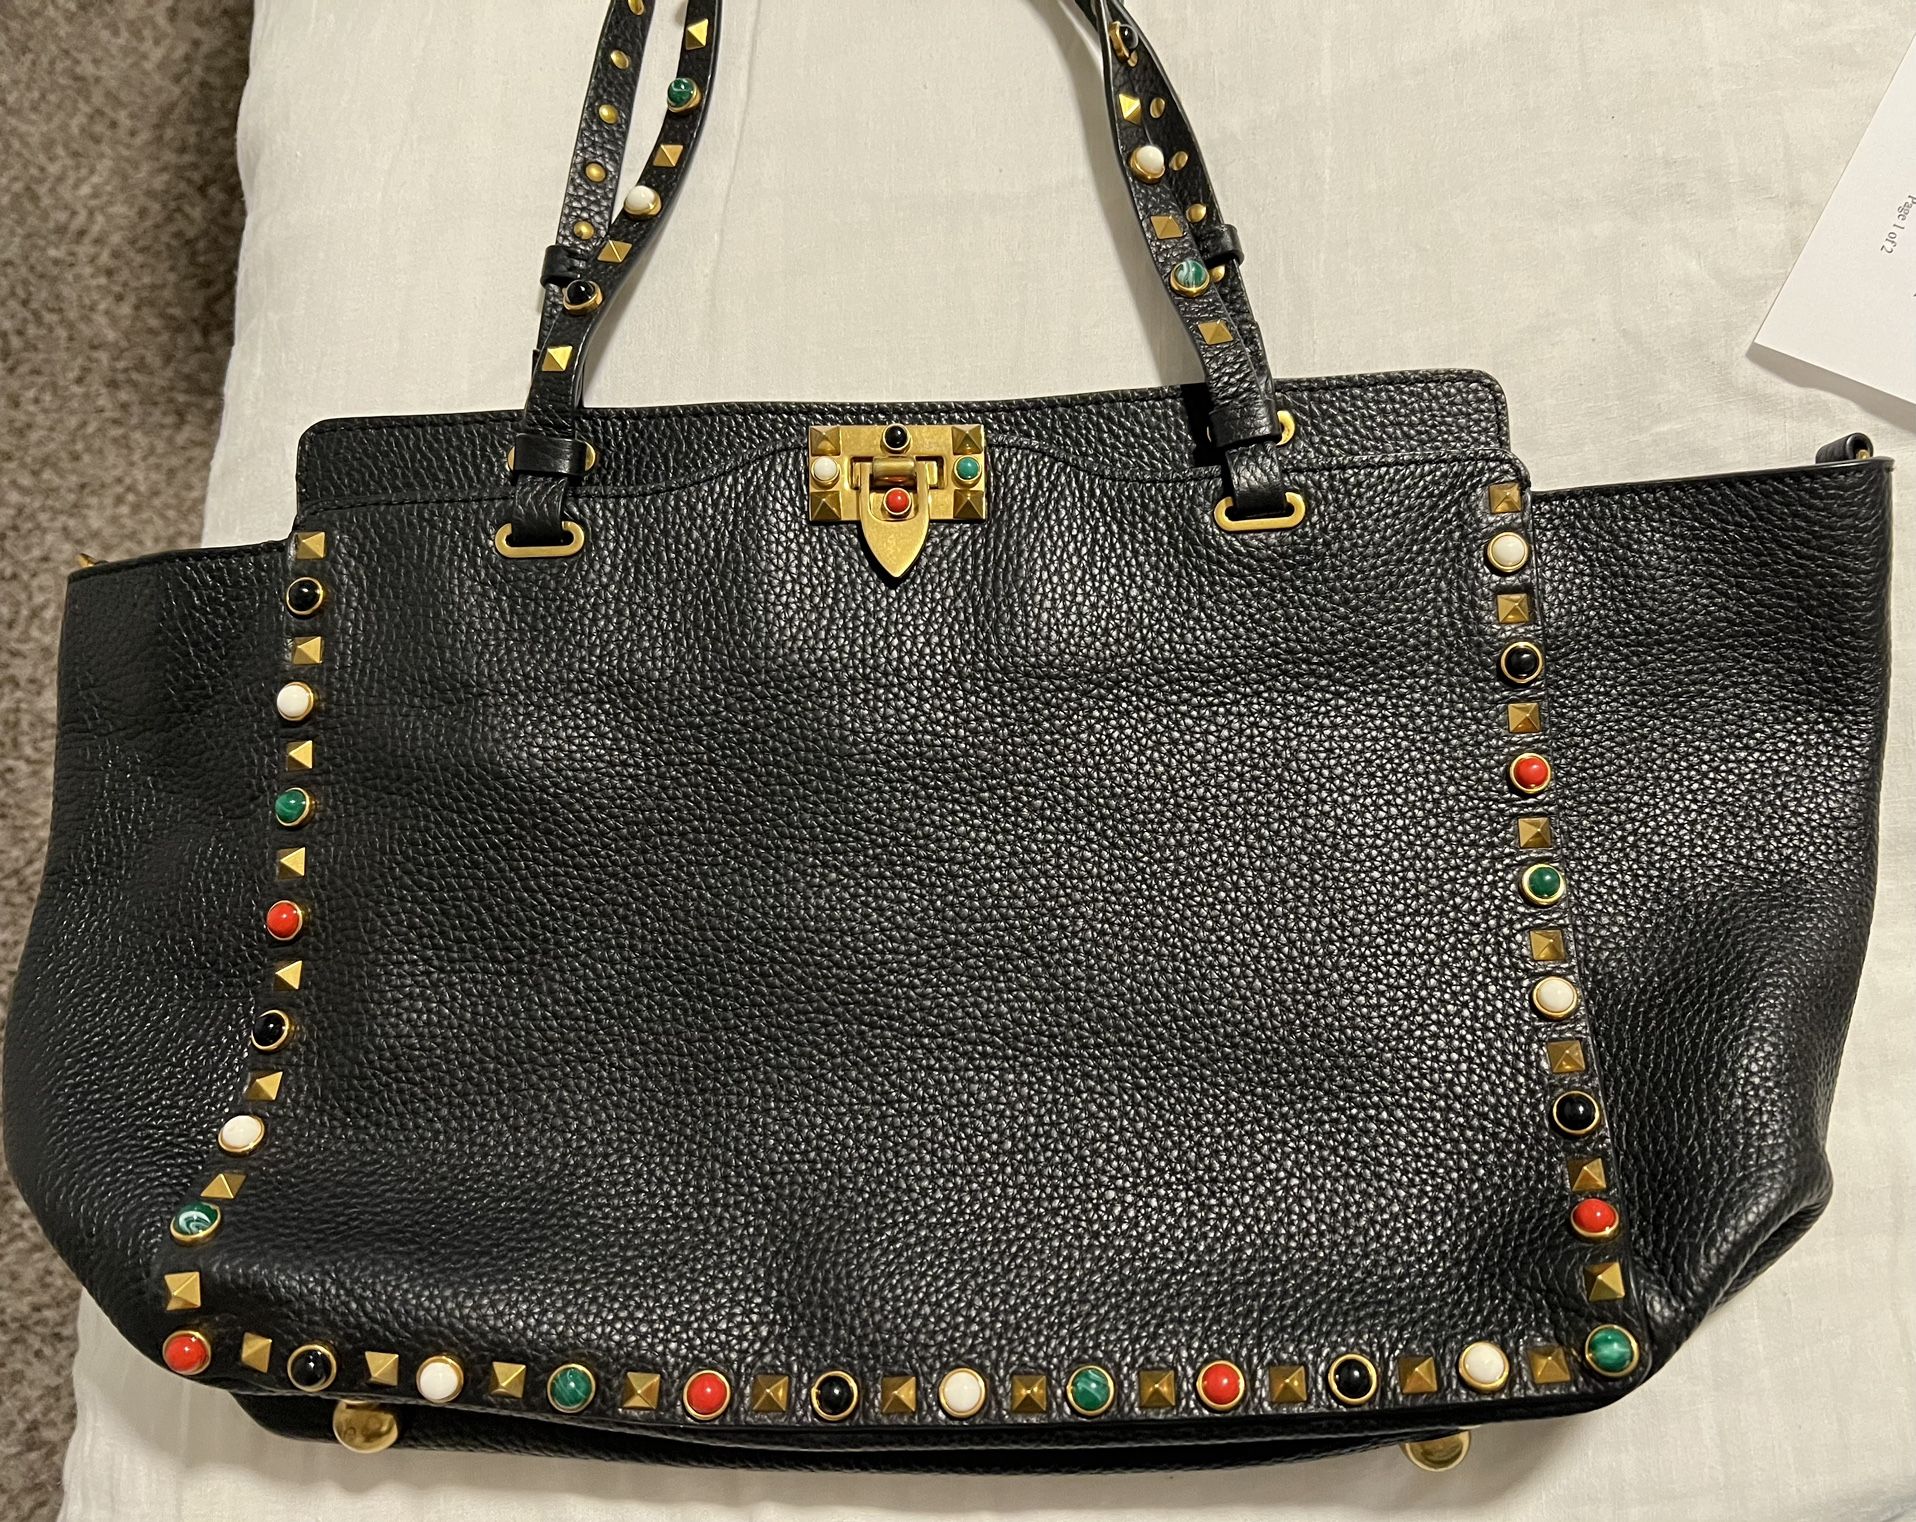 Valentino Garavani Rolling Rockstud Tote Calfskin Leather with Cabochons Large Authentic Guaranteed  